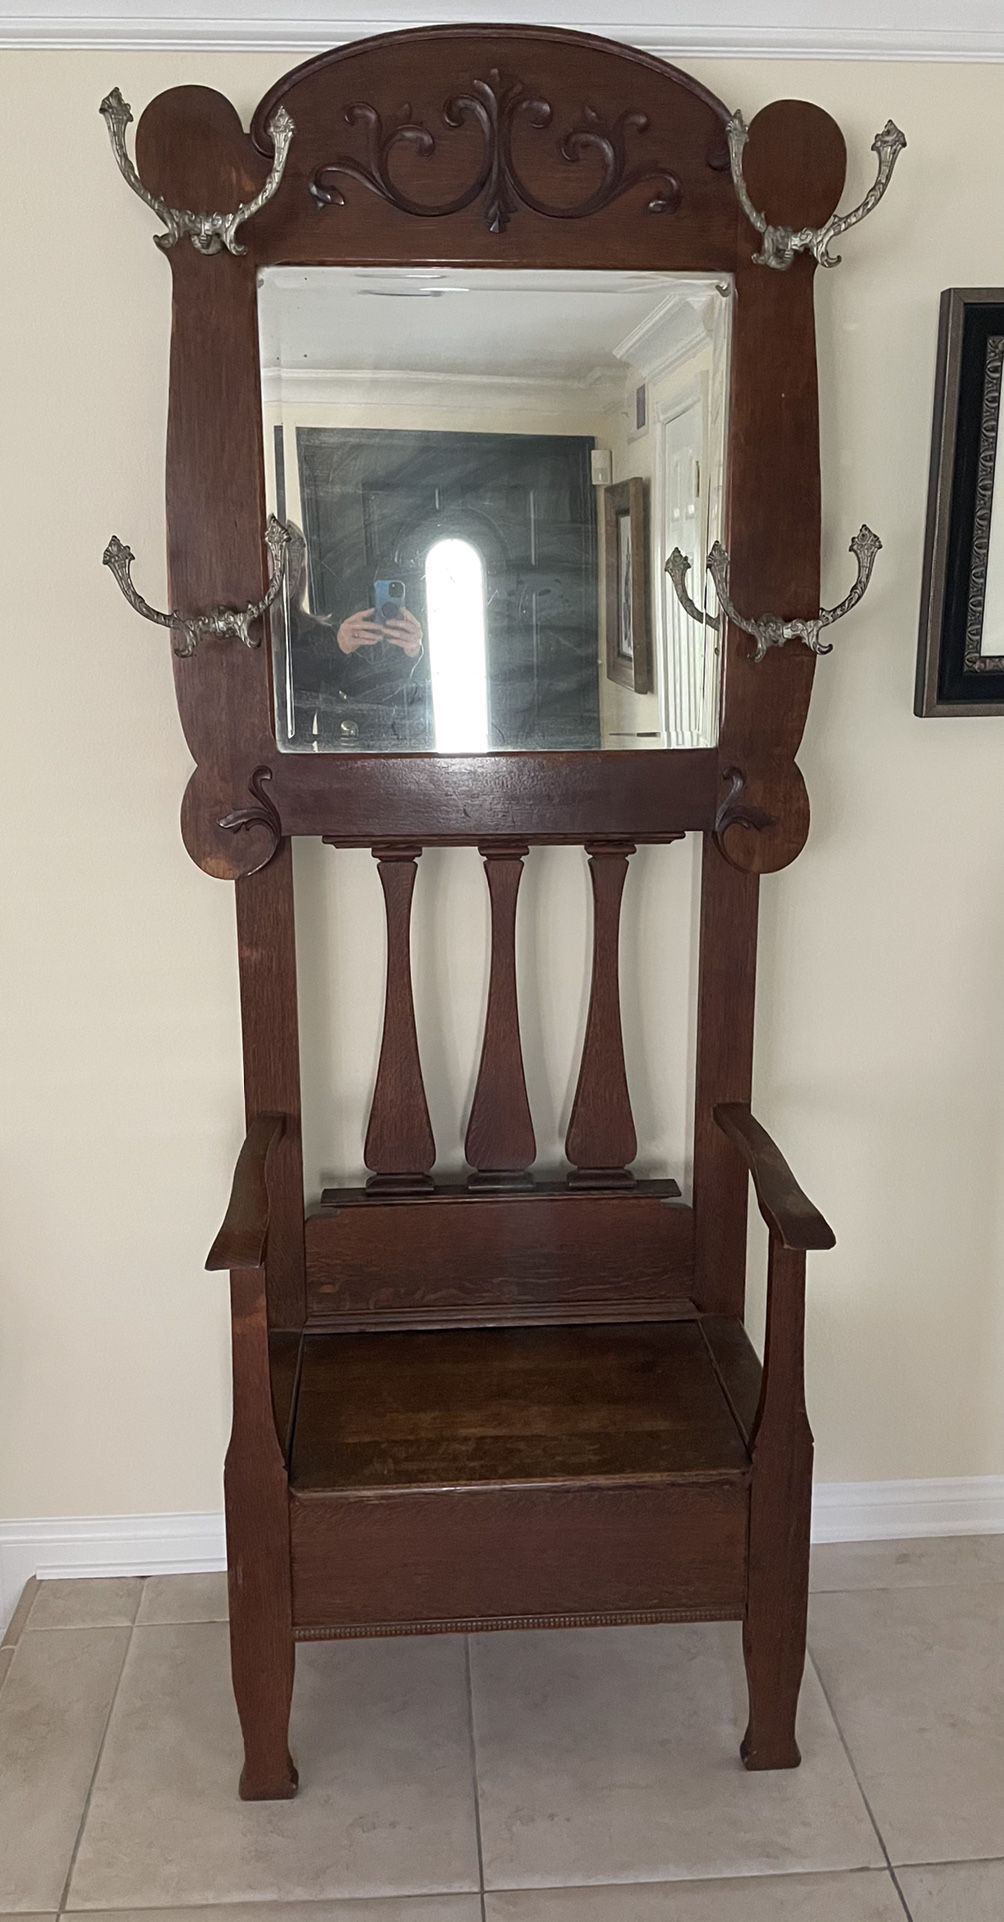 Antique Hall Tree With Storage Bench, Hall Tree With Mirror And Storage Bench